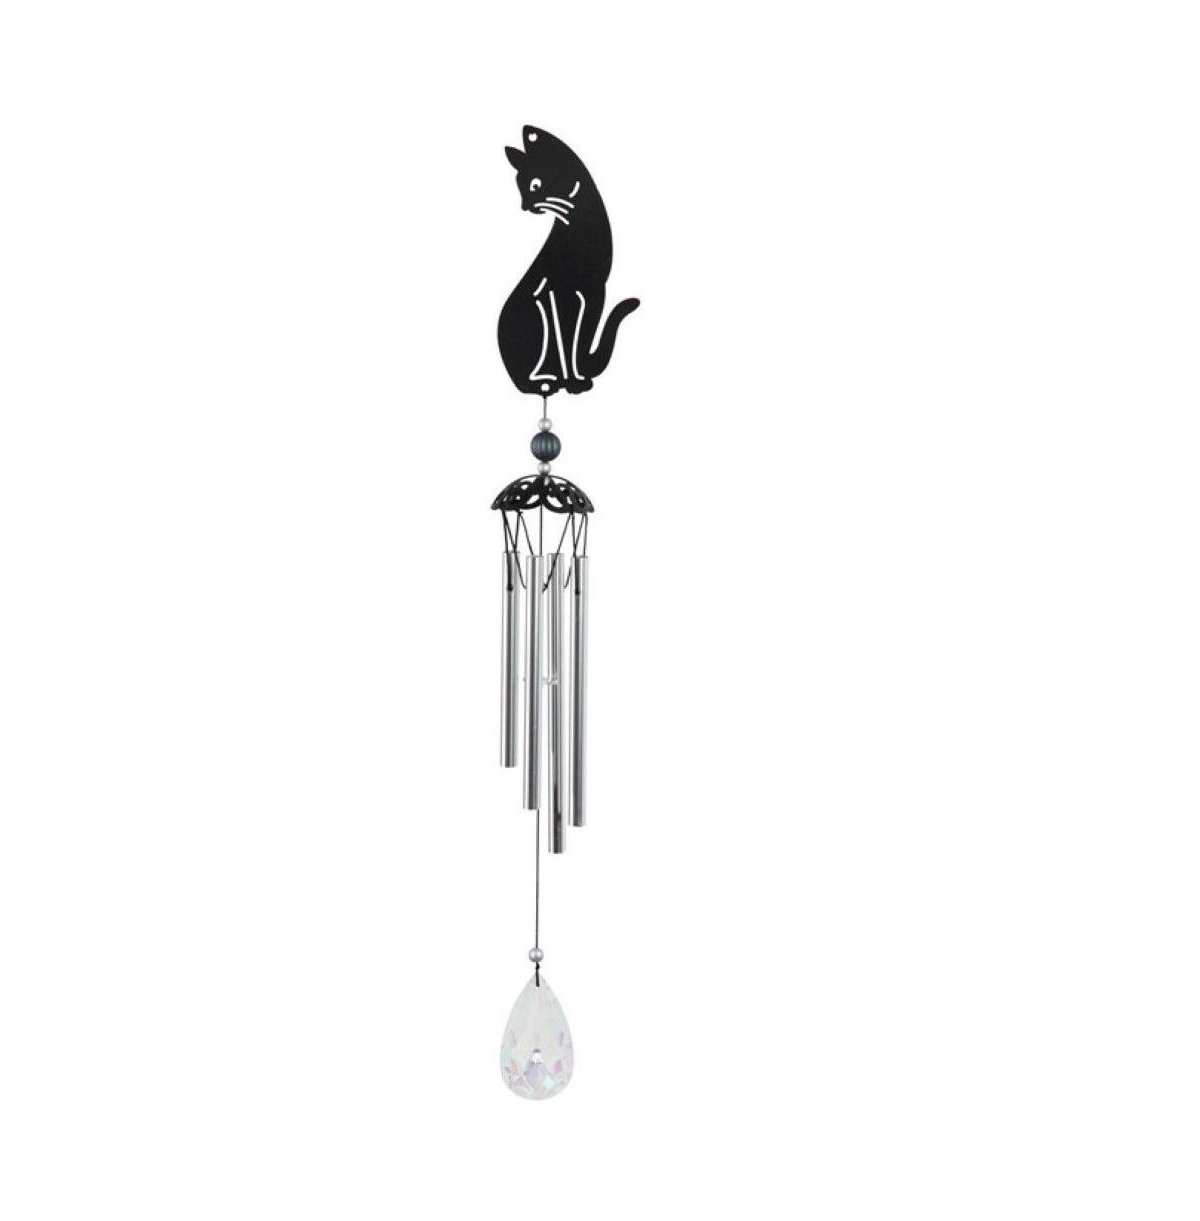 25" Long Black Cat Silhouette Wind Chime Home Decor Perfect Gift for House Warming, Holidays and Birthdays - Black